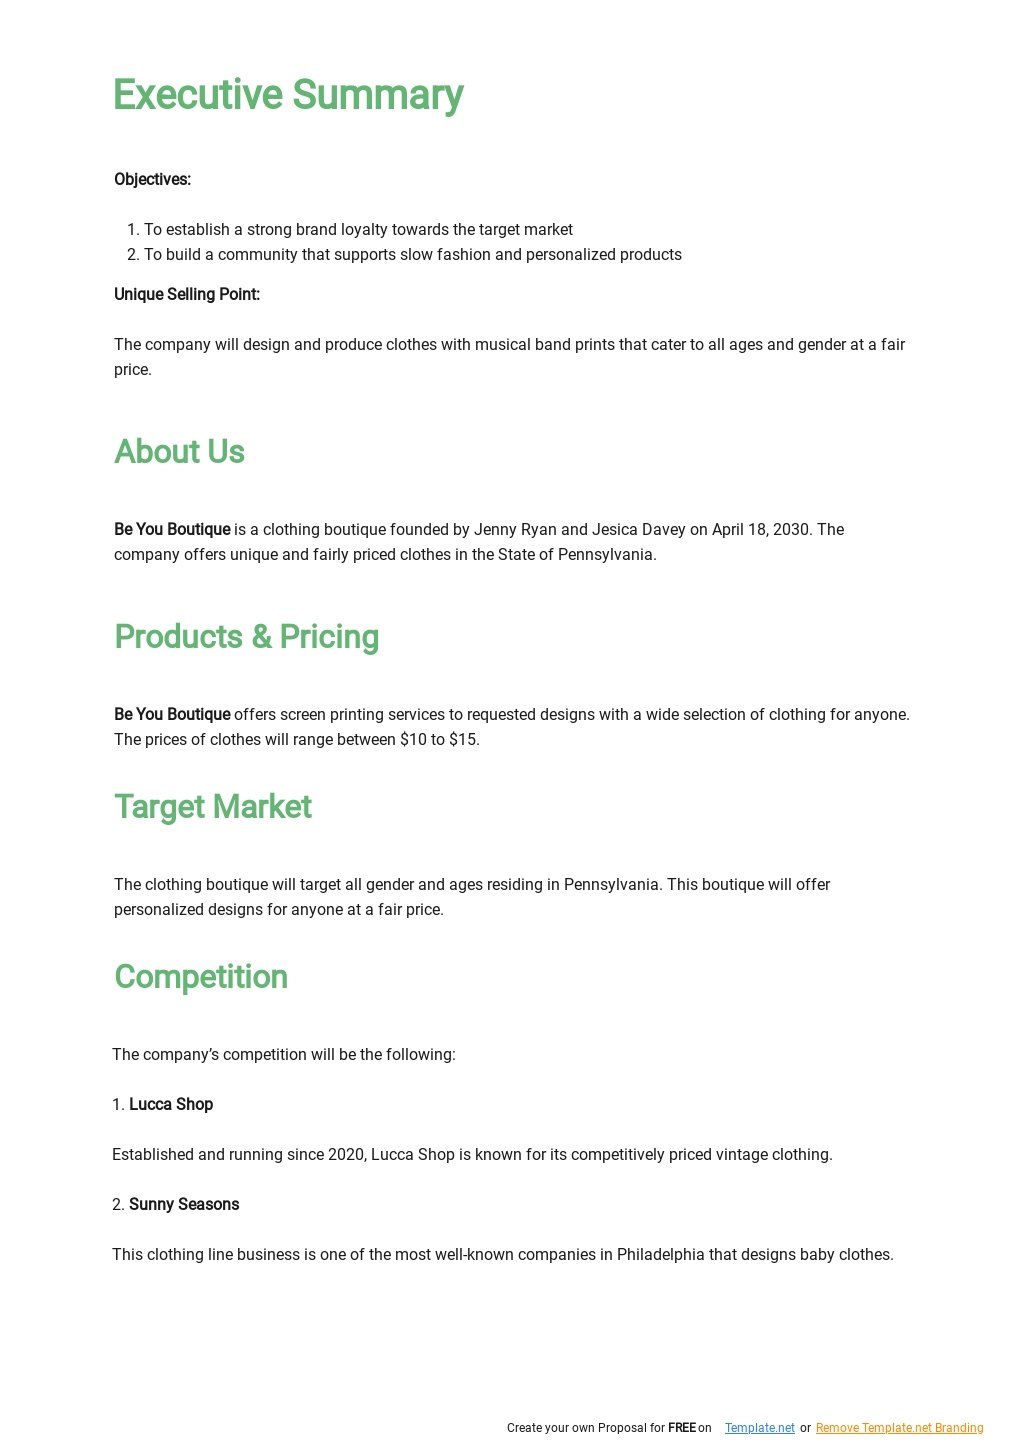 clothing line business plan sample